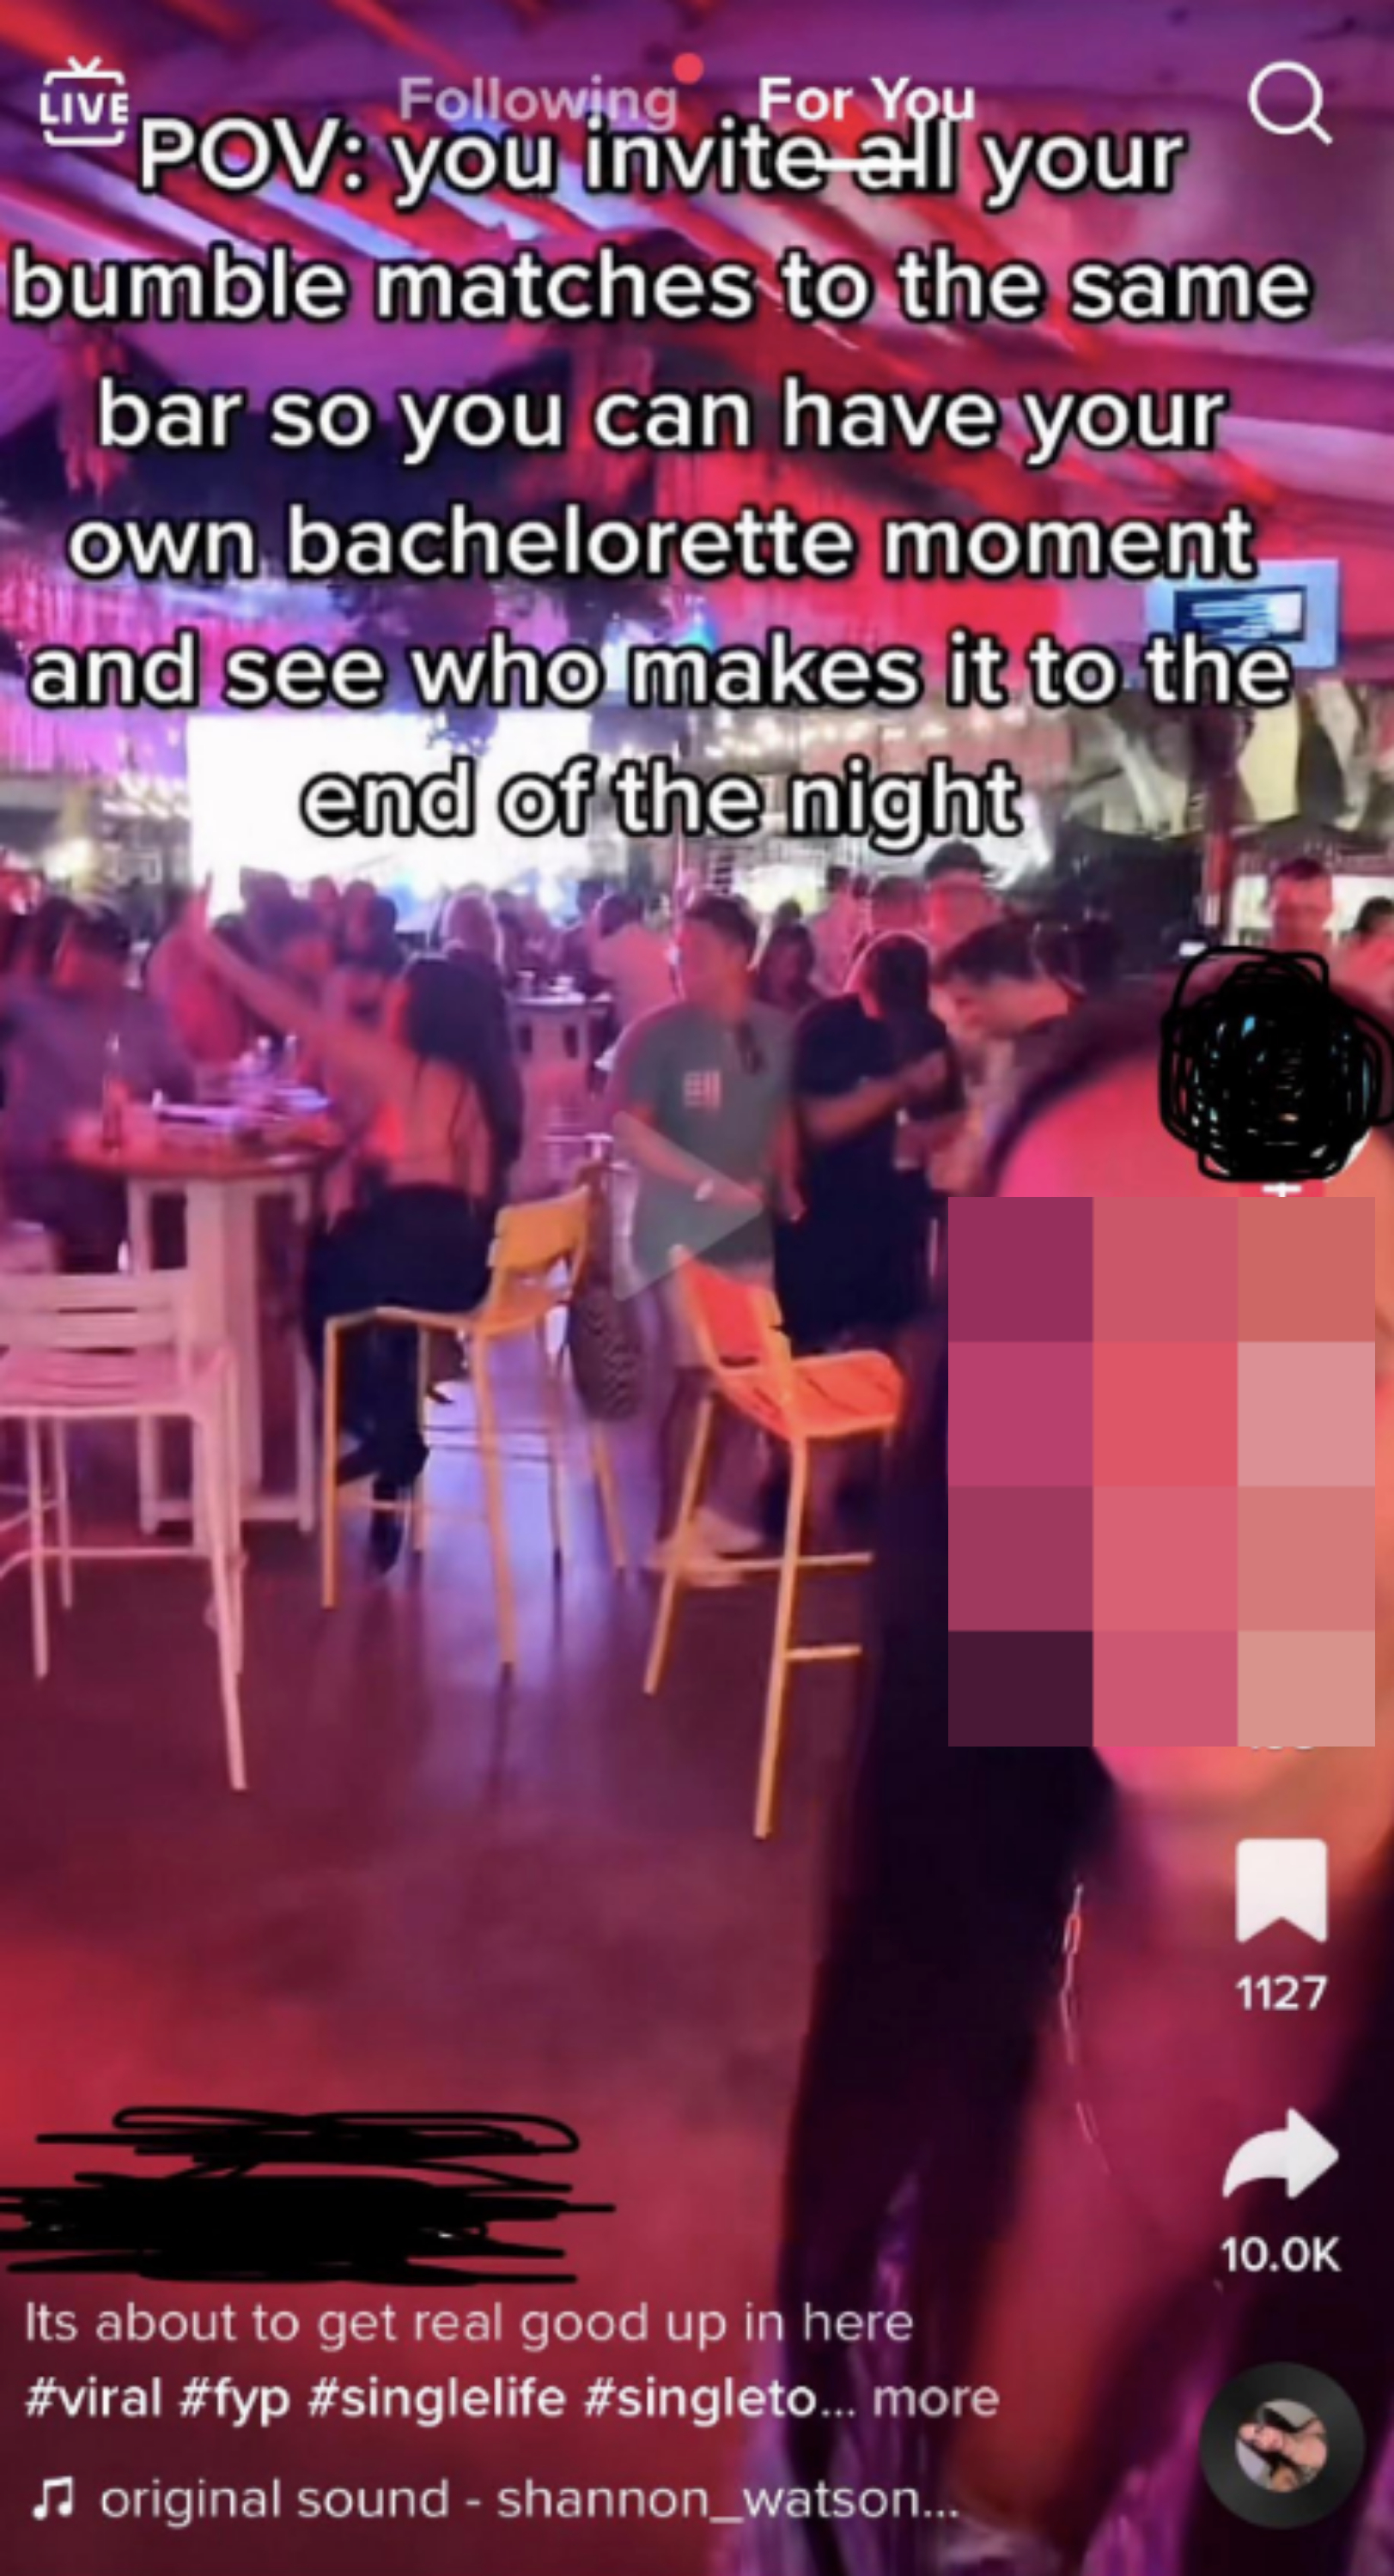 person invited all her matches to the same bar to live out her own bachelorette night